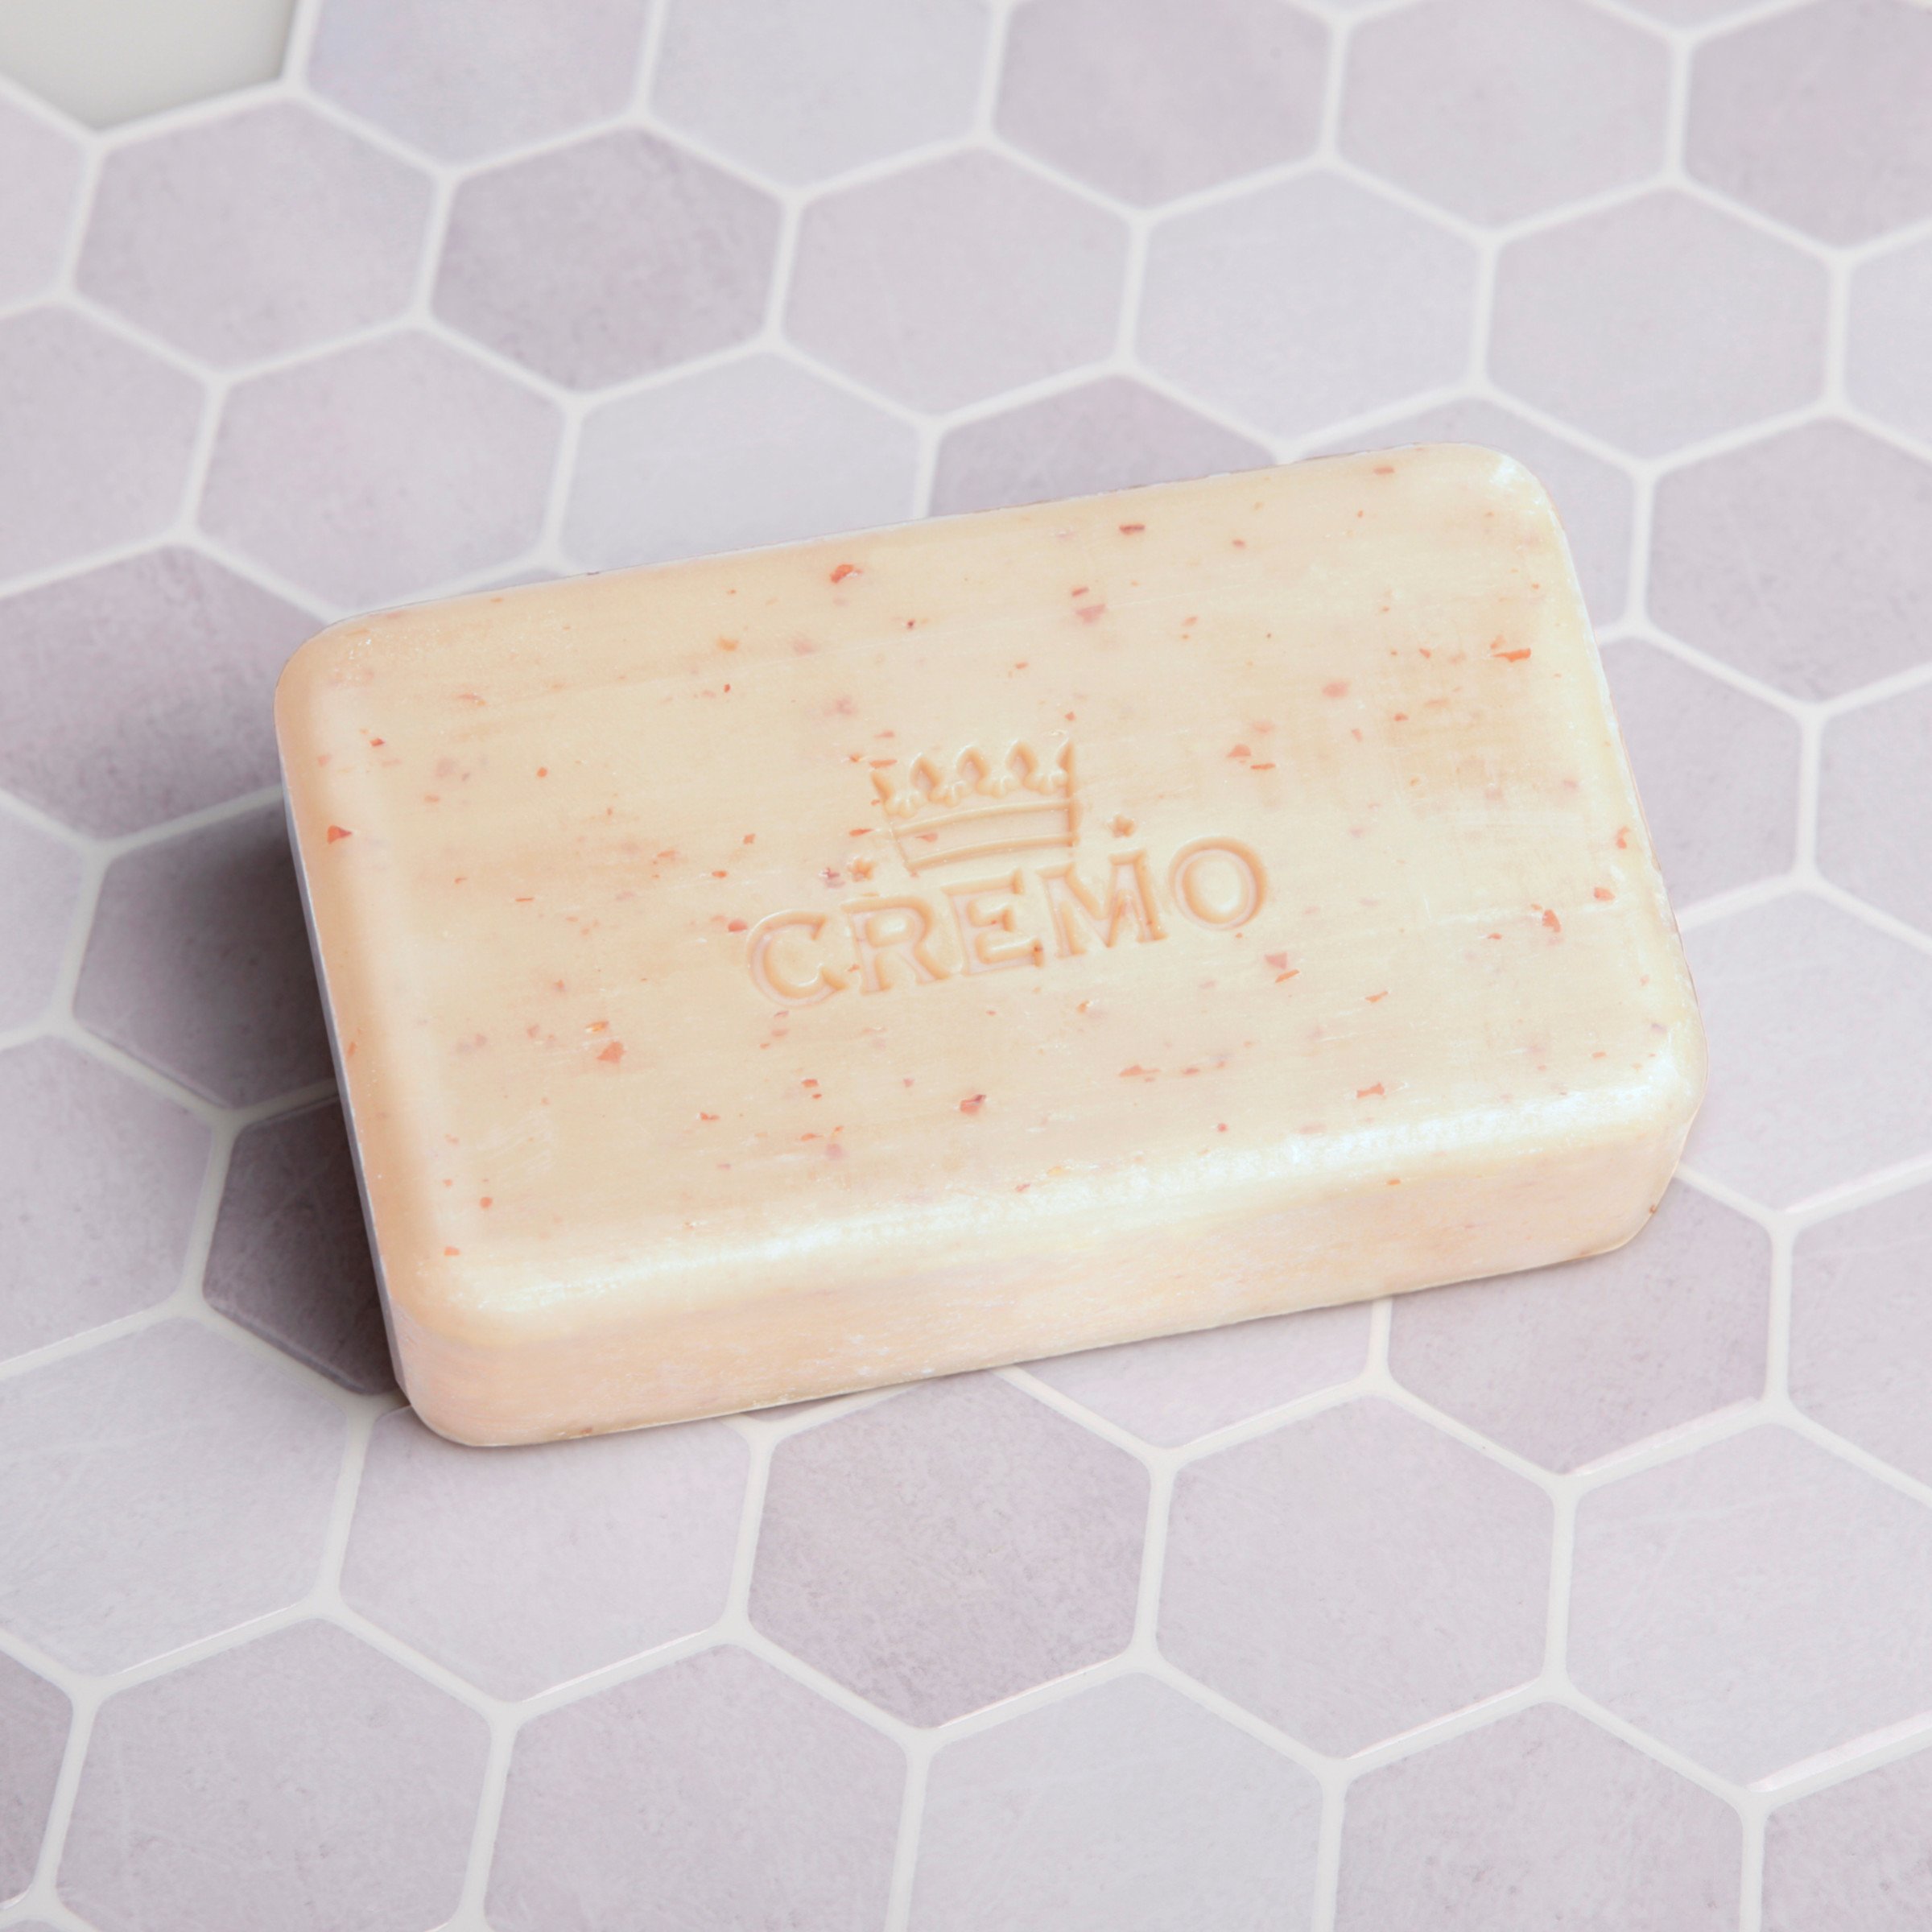 Cremo Exfoliating Body Bars Palo Santo (Reserve Collection) - A Combination of Lava Rock and Oat Kernel Gently Polishes While Shea Butter Leaves